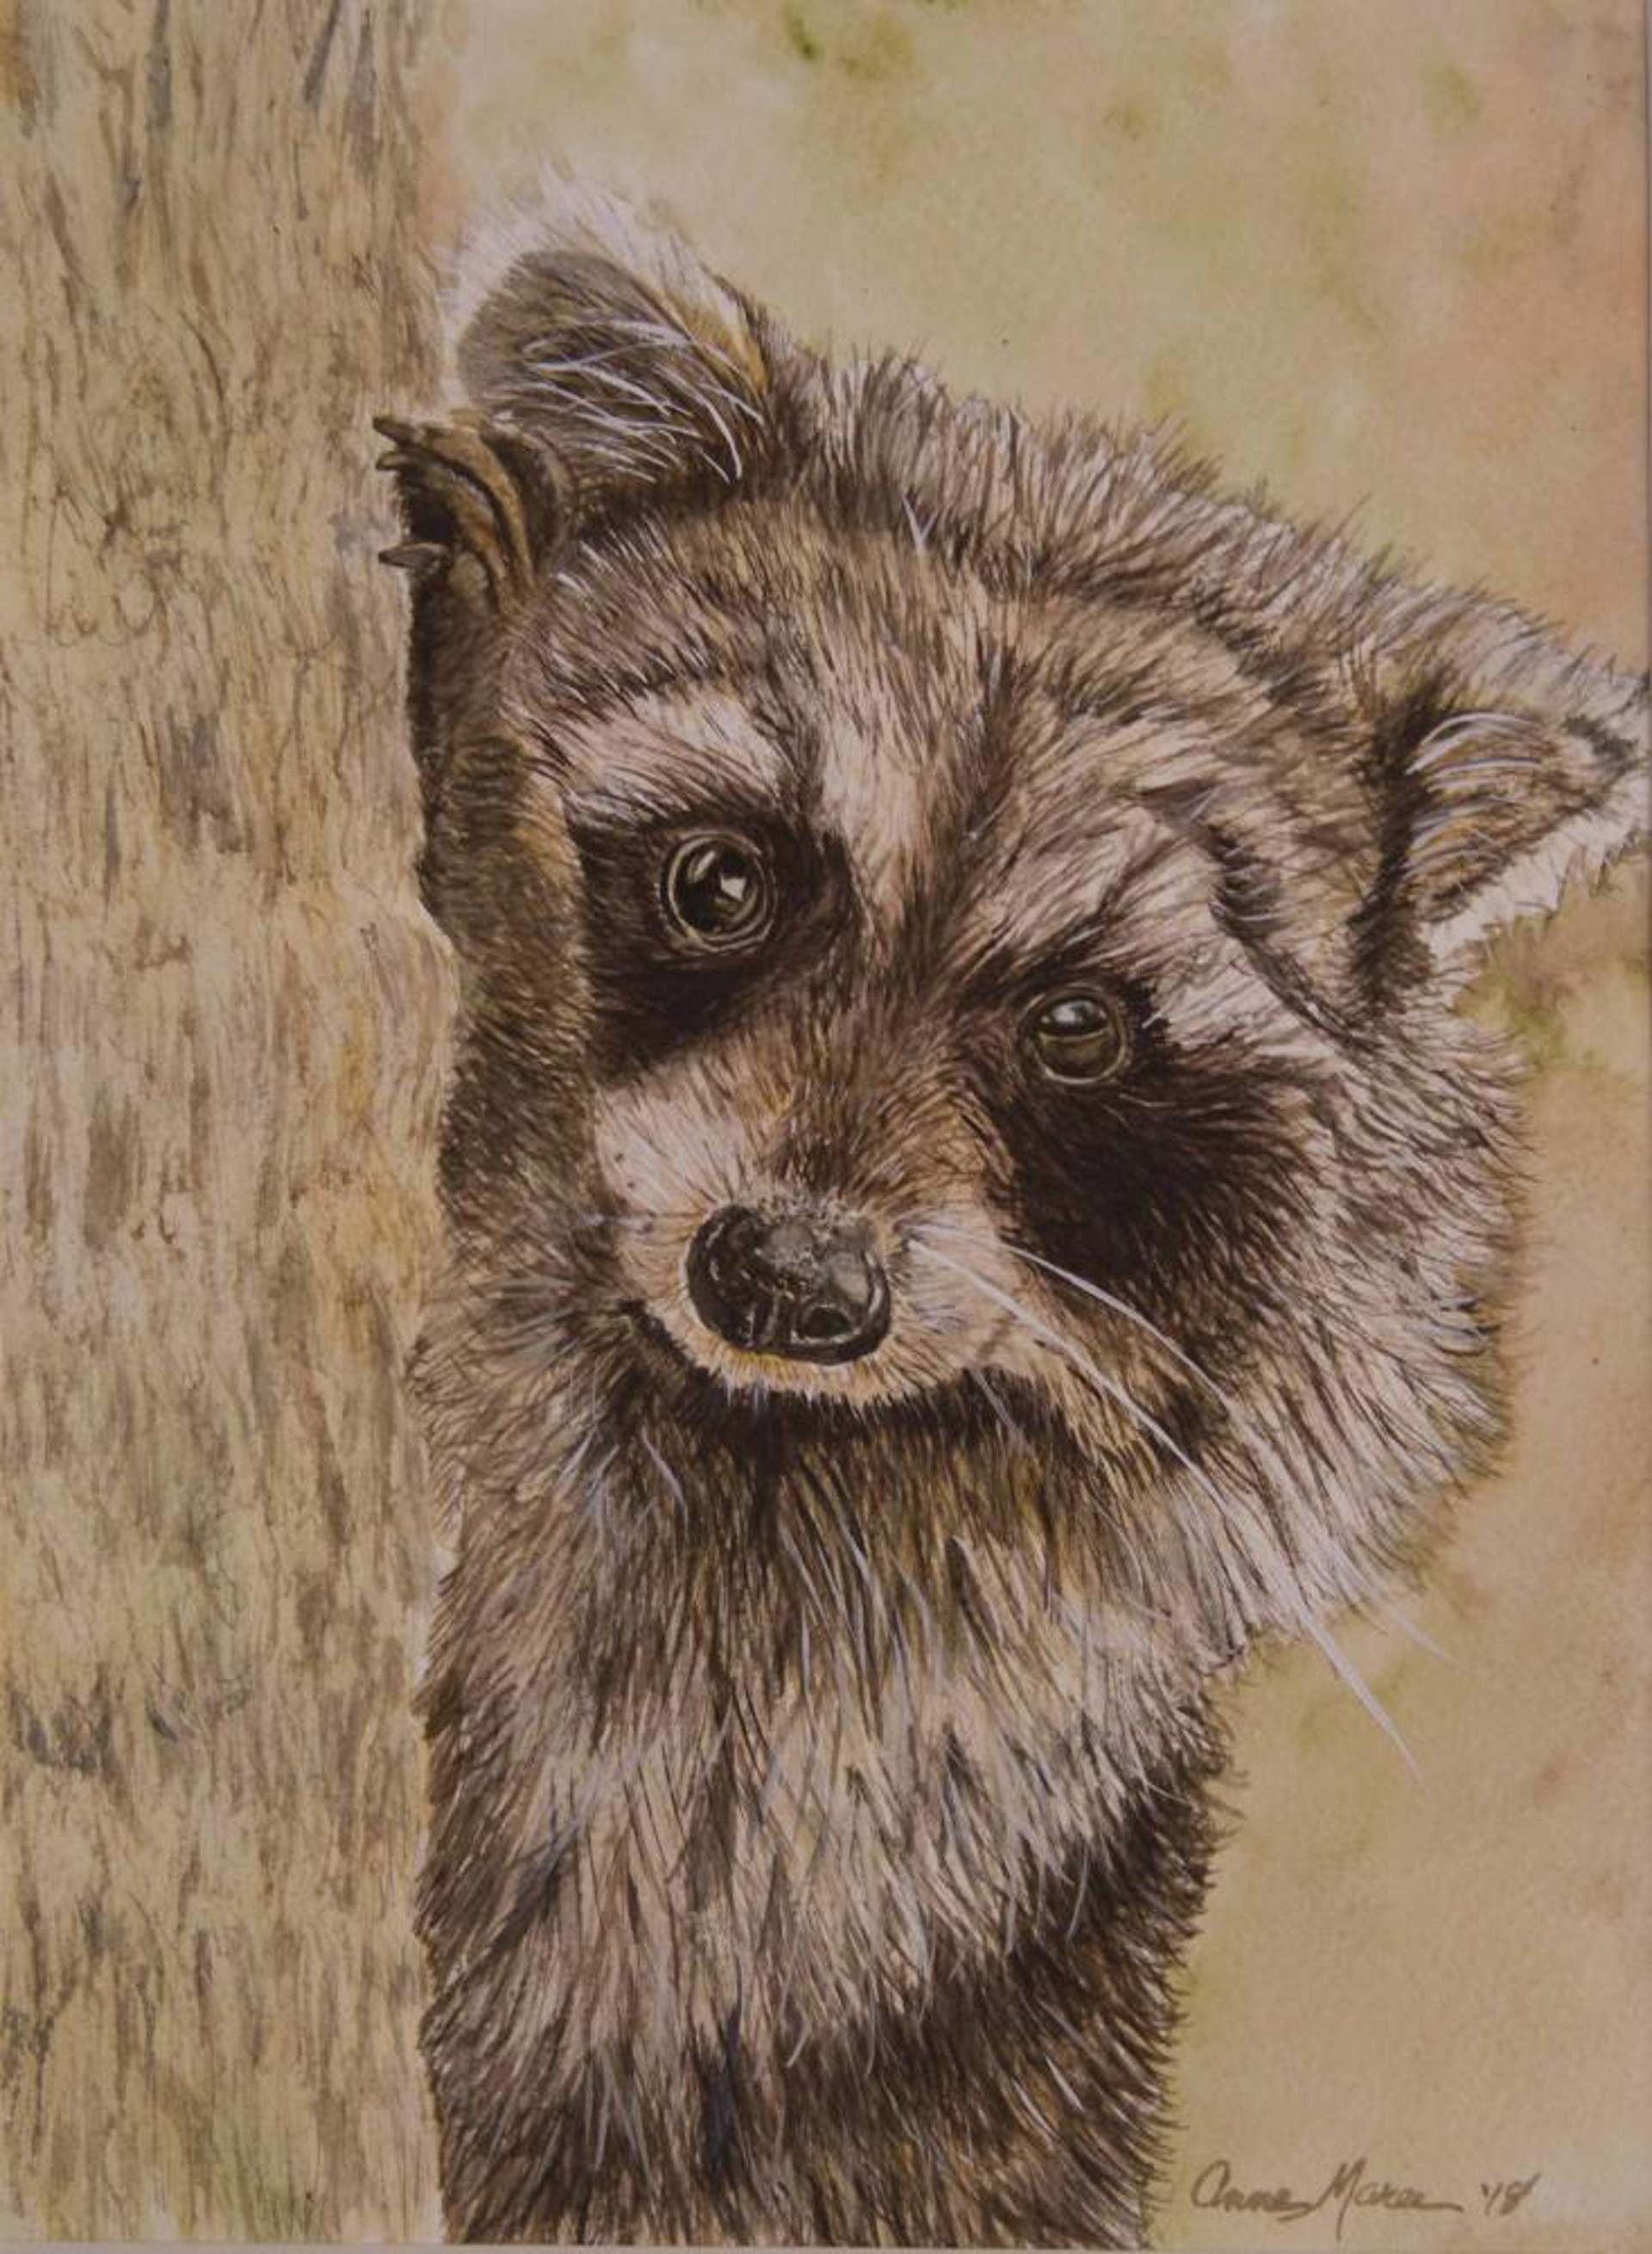 Mrs. Boone's Raccoon by Anne Maree Lawrence